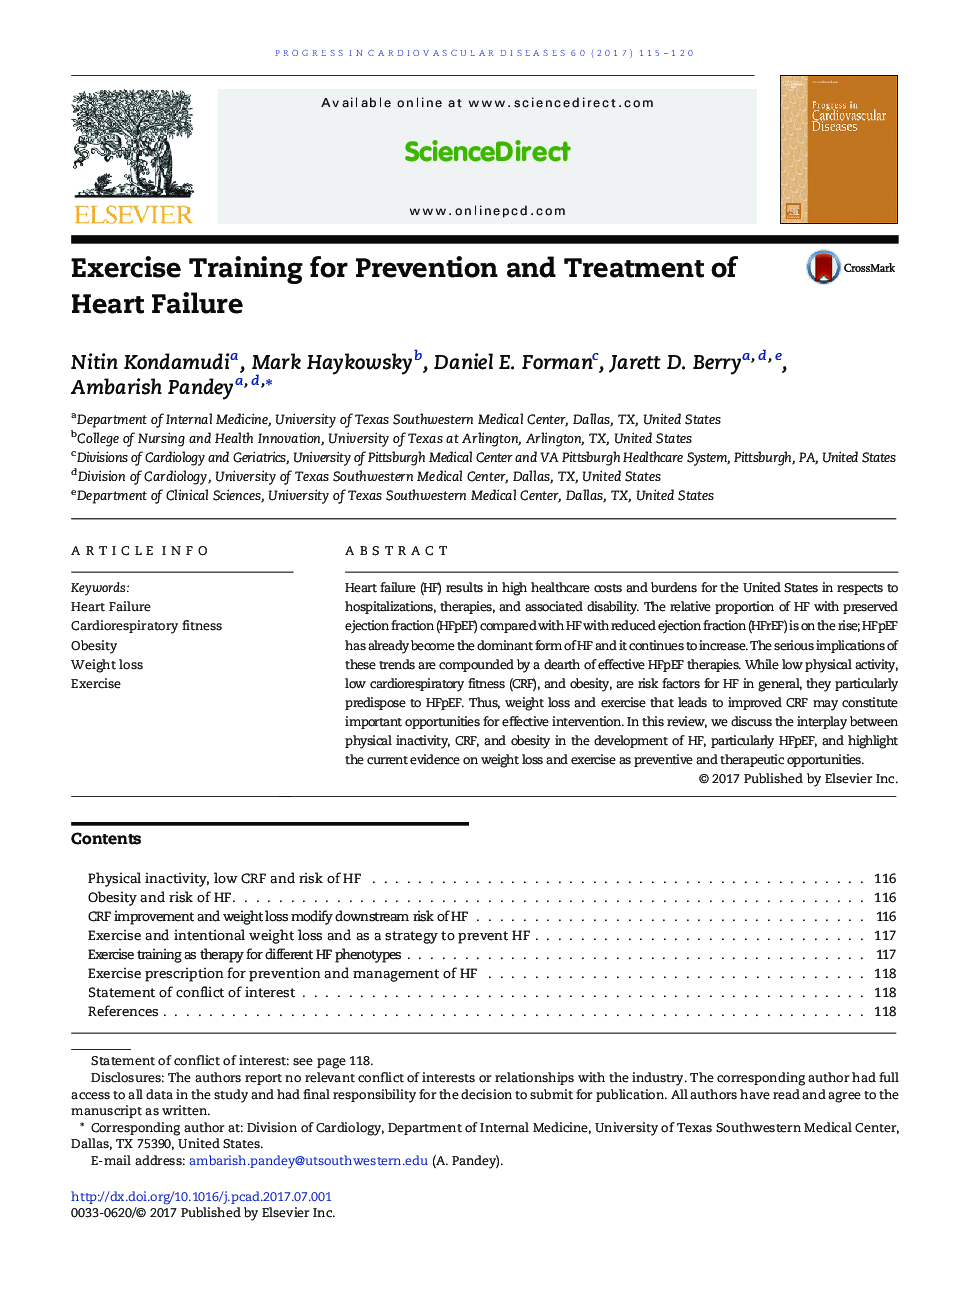 Exercise Training for Prevention and Treatment of Heart Failure